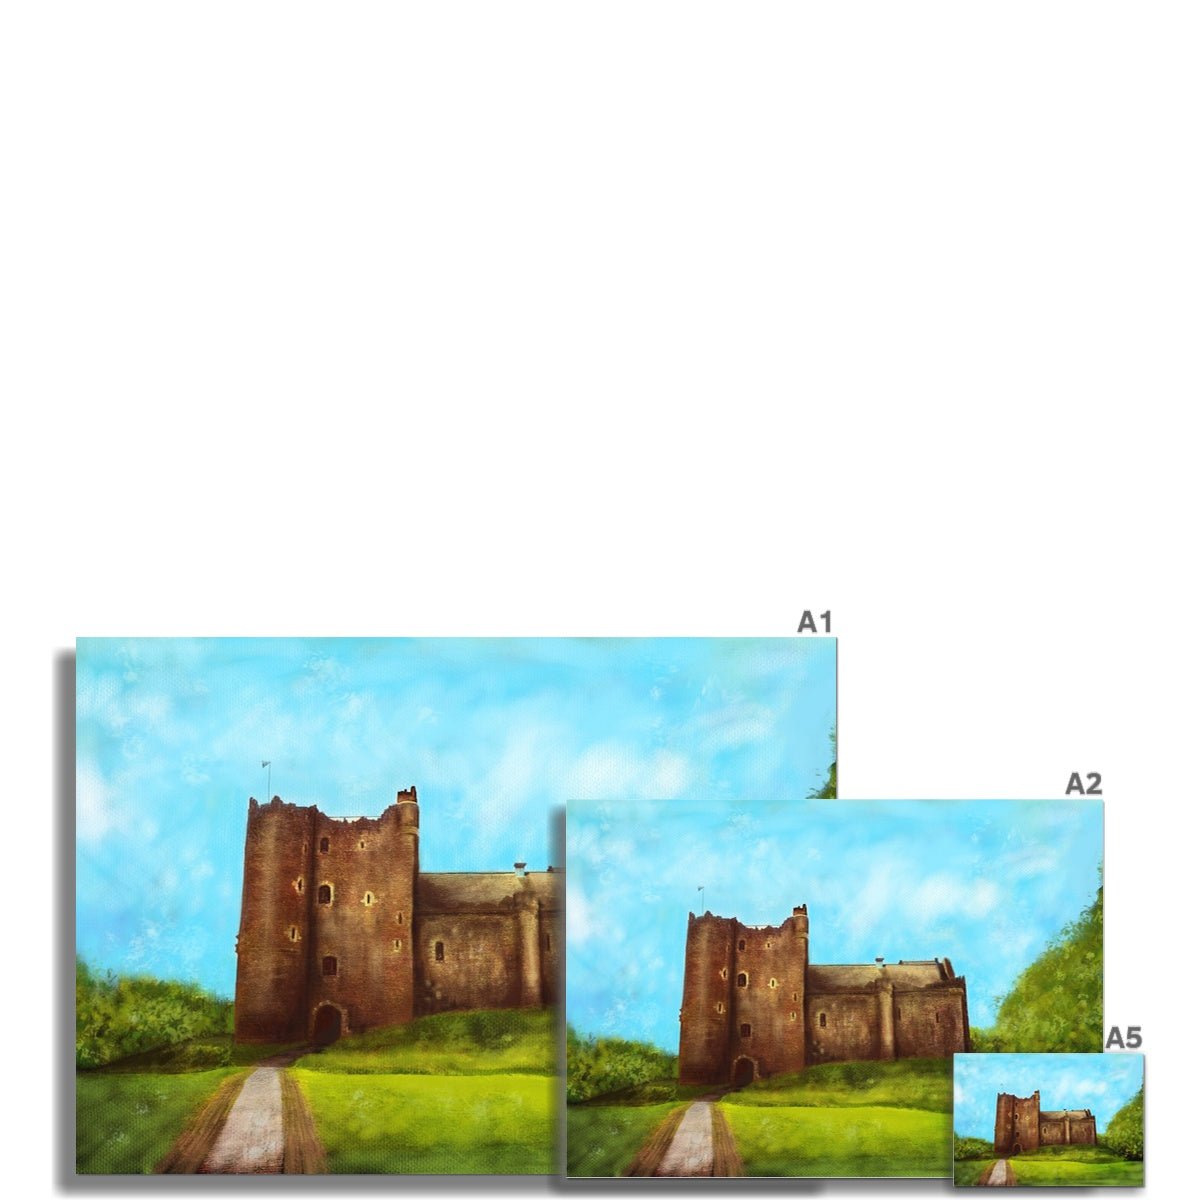 Doune Castle Painting | Fine Art Prints From Scotland-Unframed Prints-Historic & Iconic Scotland Art Gallery-Paintings, Prints, Homeware, Art Gifts From Scotland By Scottish Artist Kevin Hunter